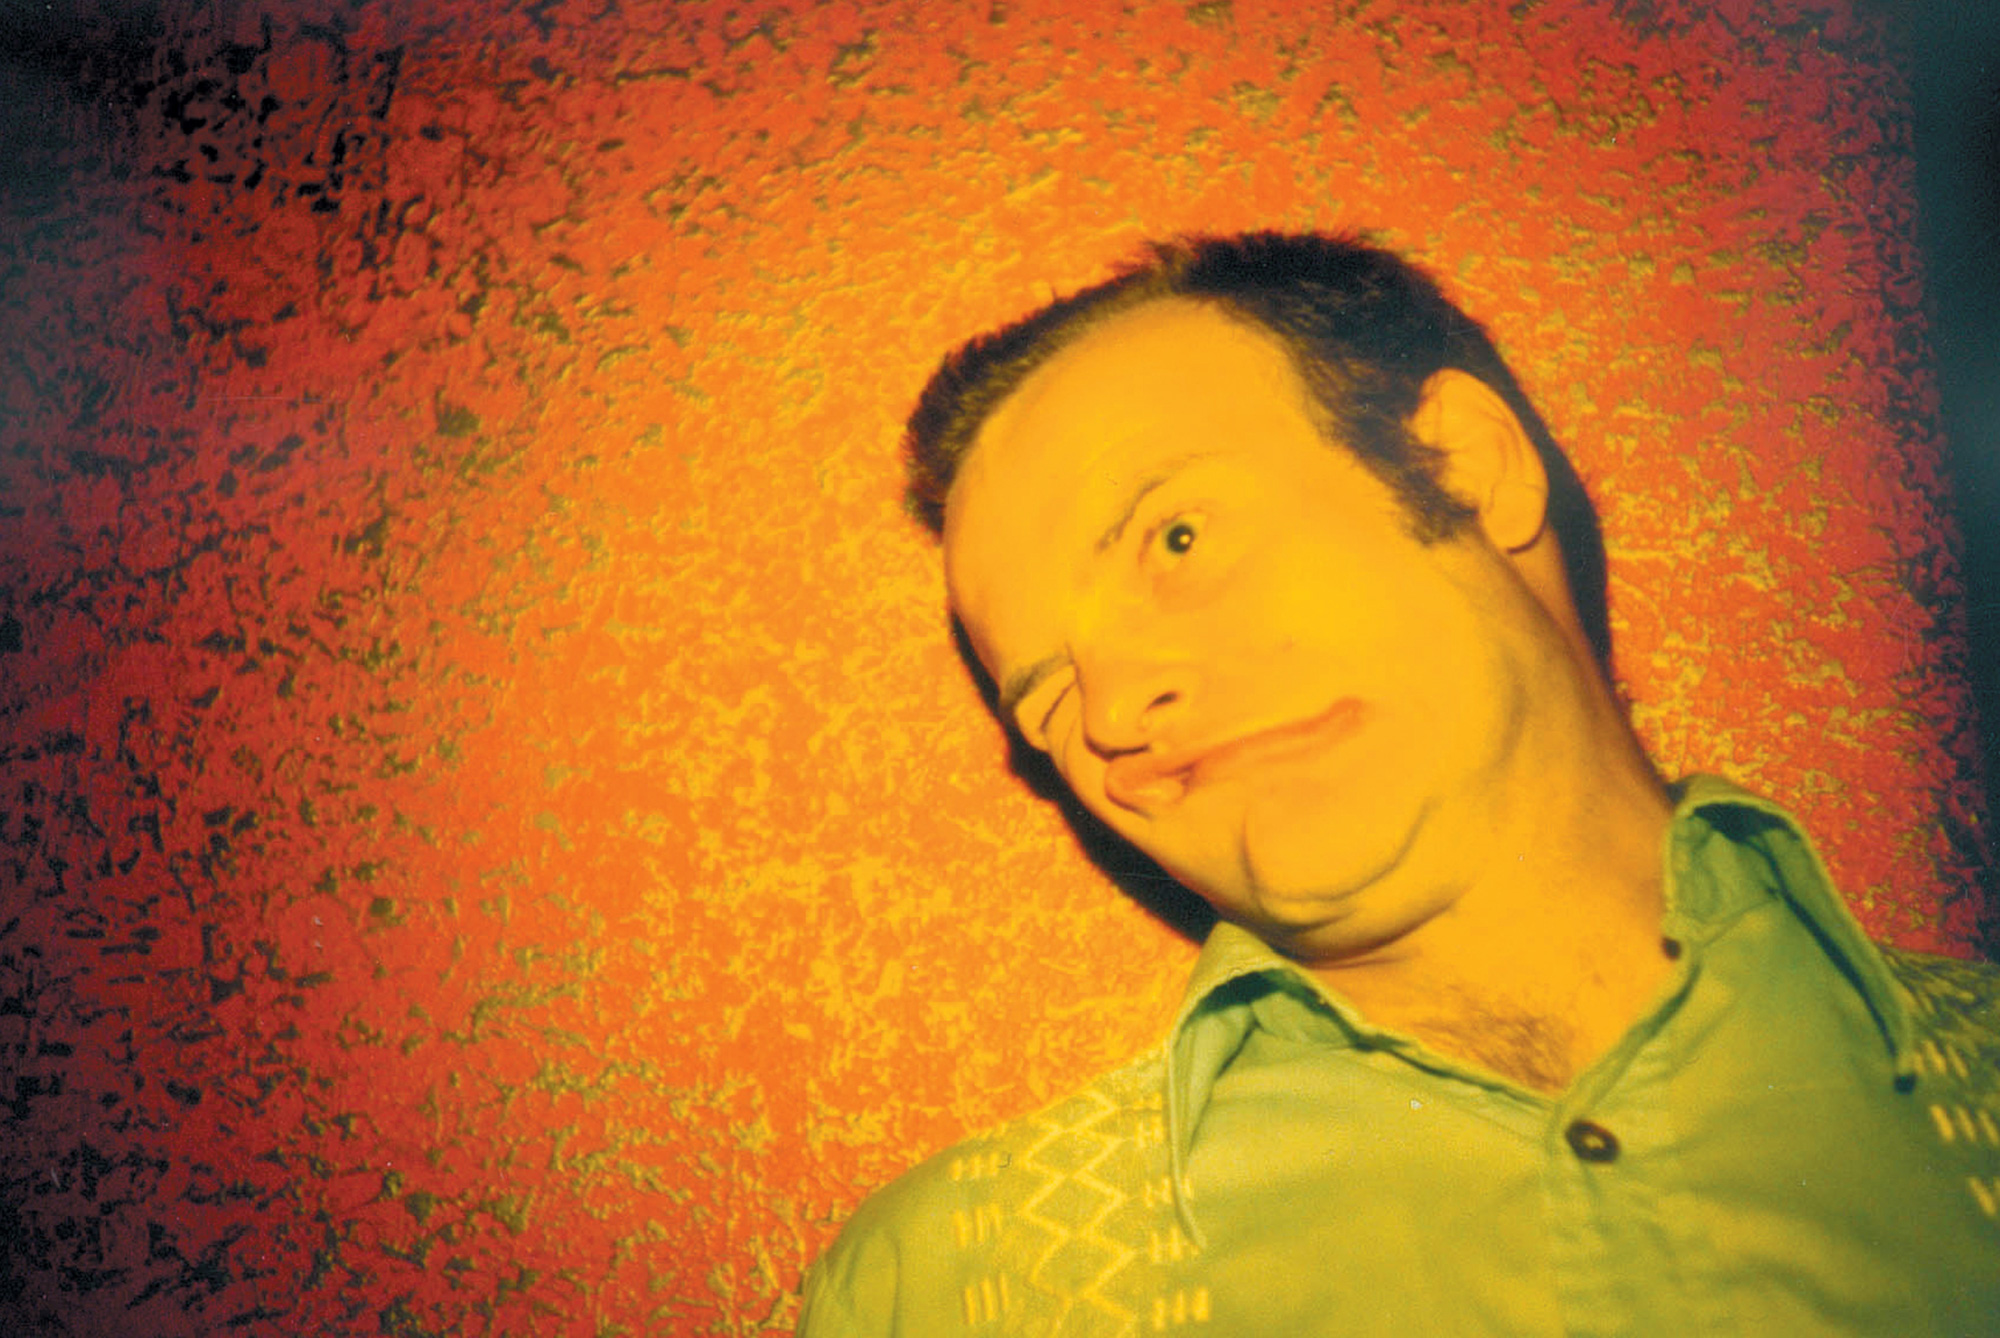 A Lomographic image depicting a man making a funny face.